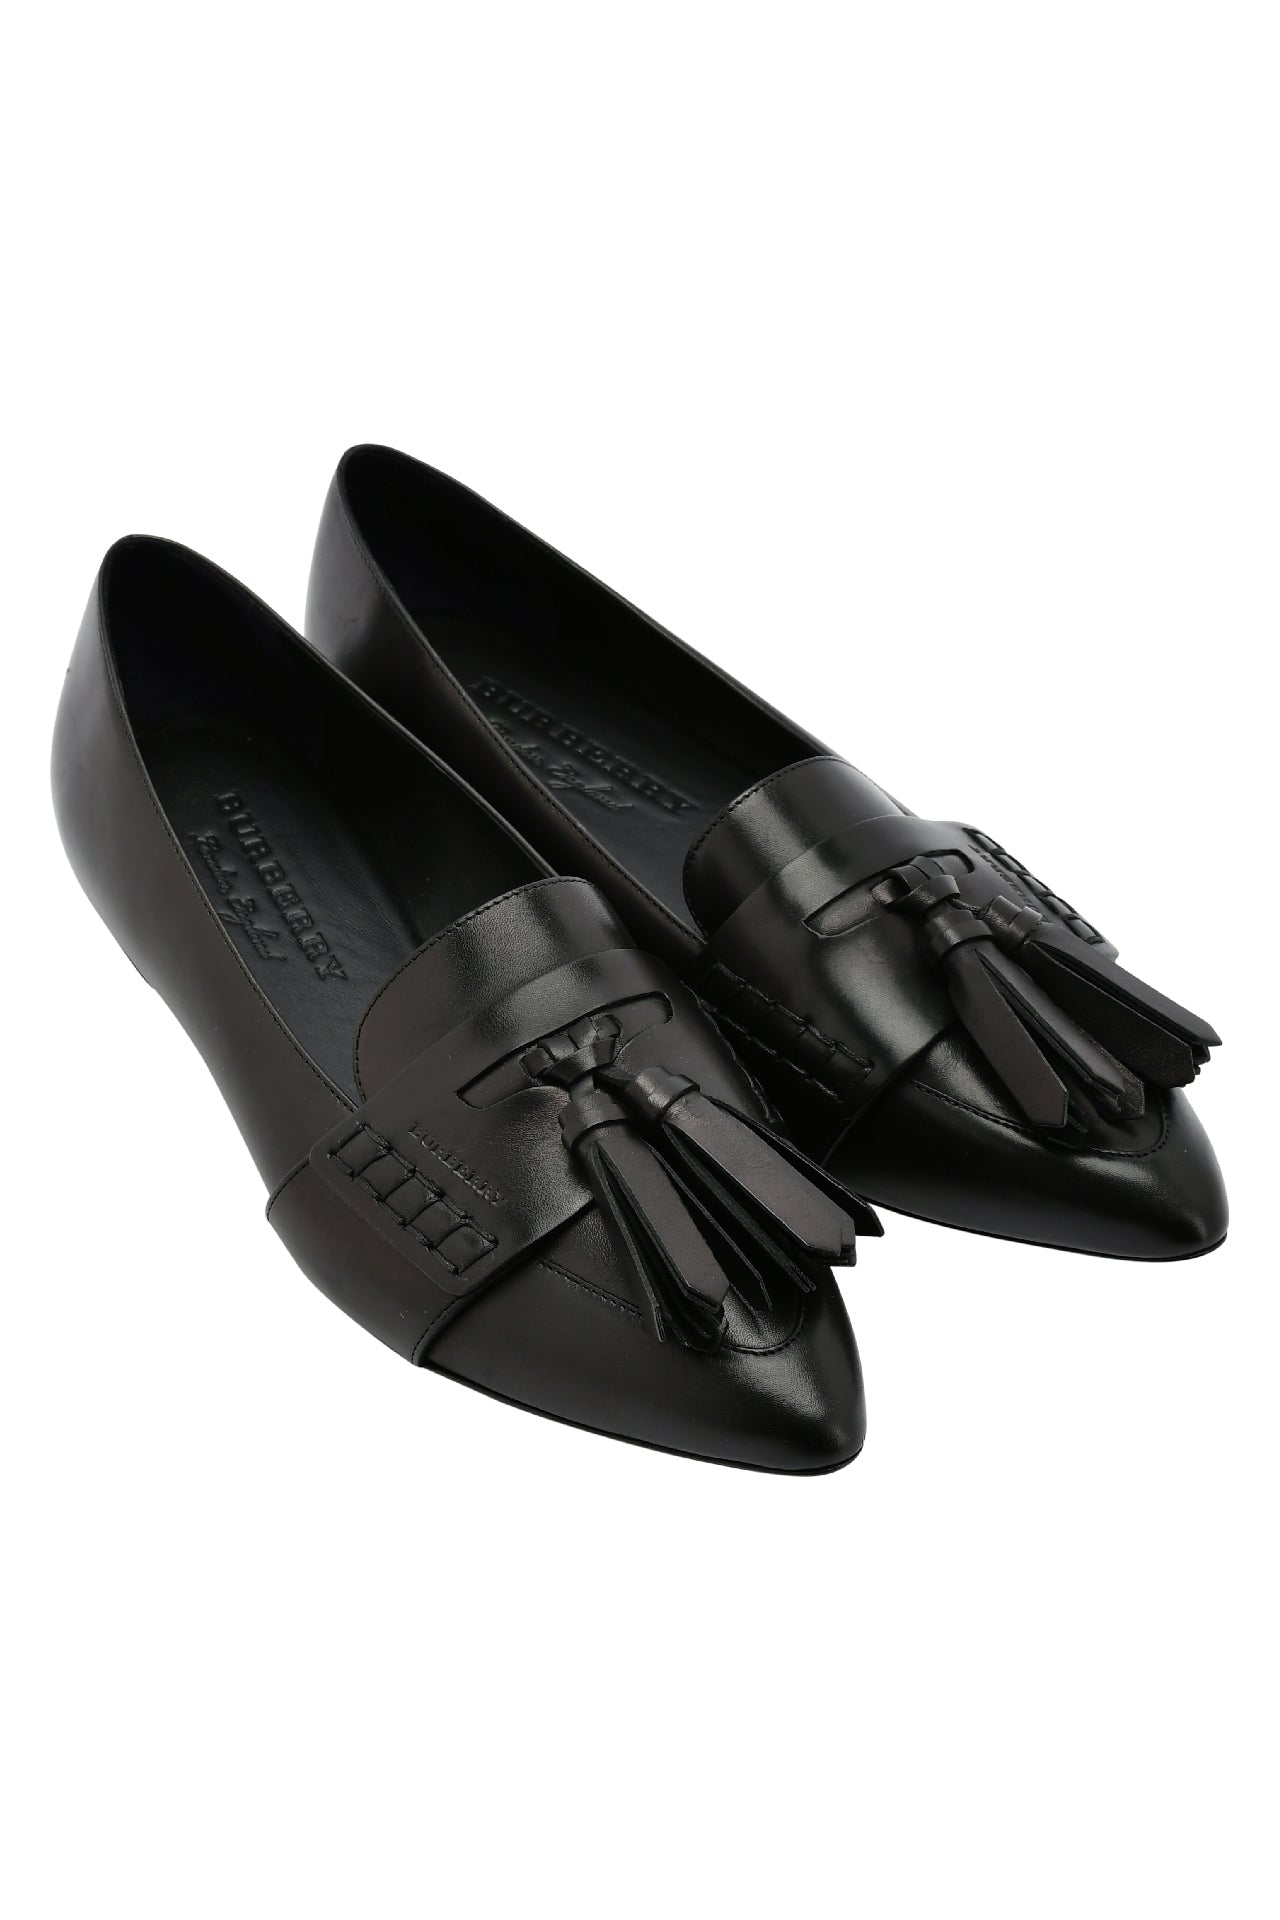 Burberry Black Leather Coledale Tassel Detail Pointed Toe Penny Loafers EU 39.5